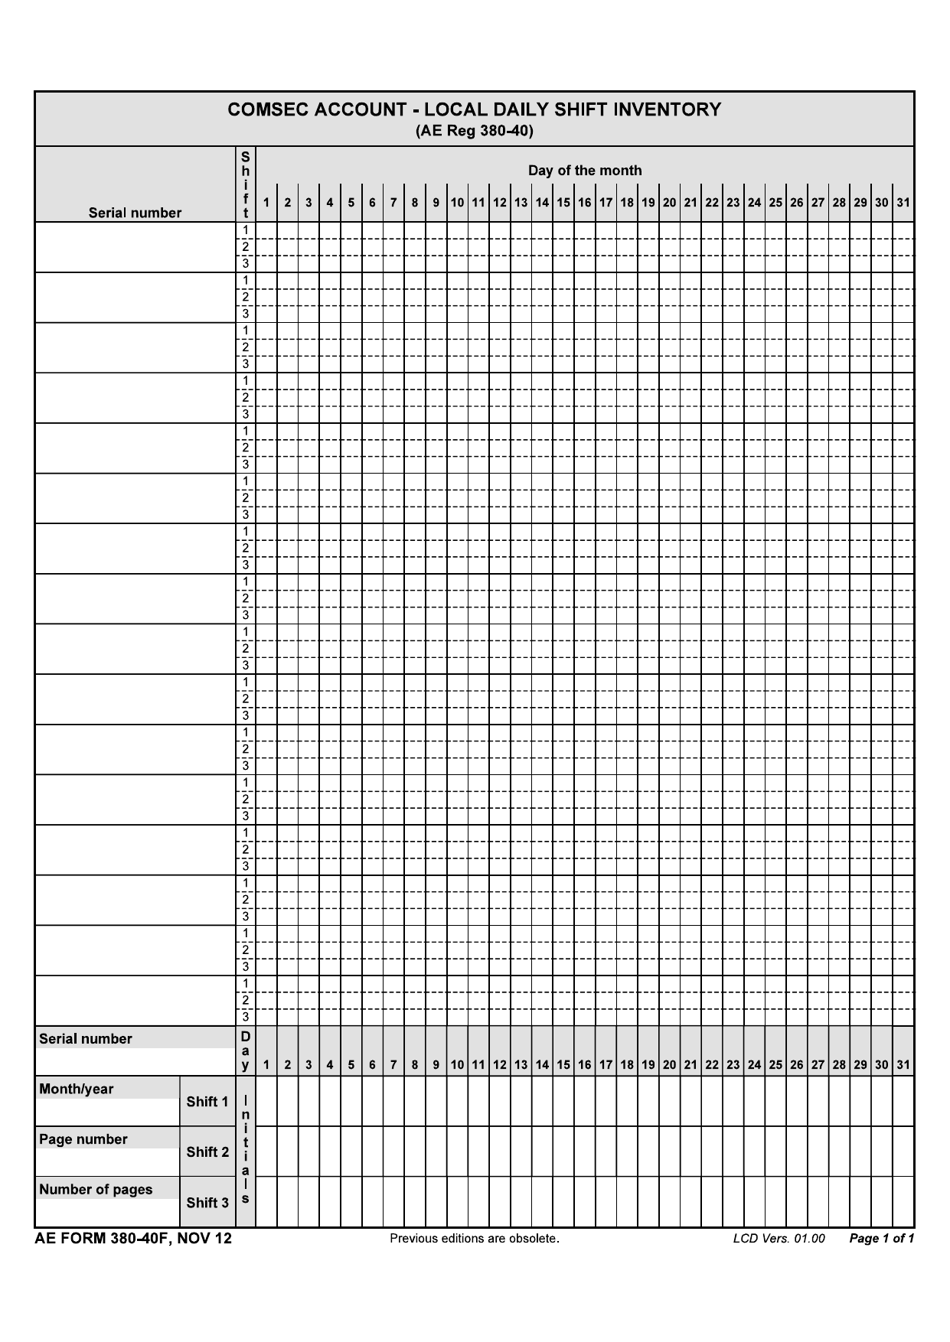 AE Form 380-40F Comsec Account - Local Daily Shift Inventory, Page 1